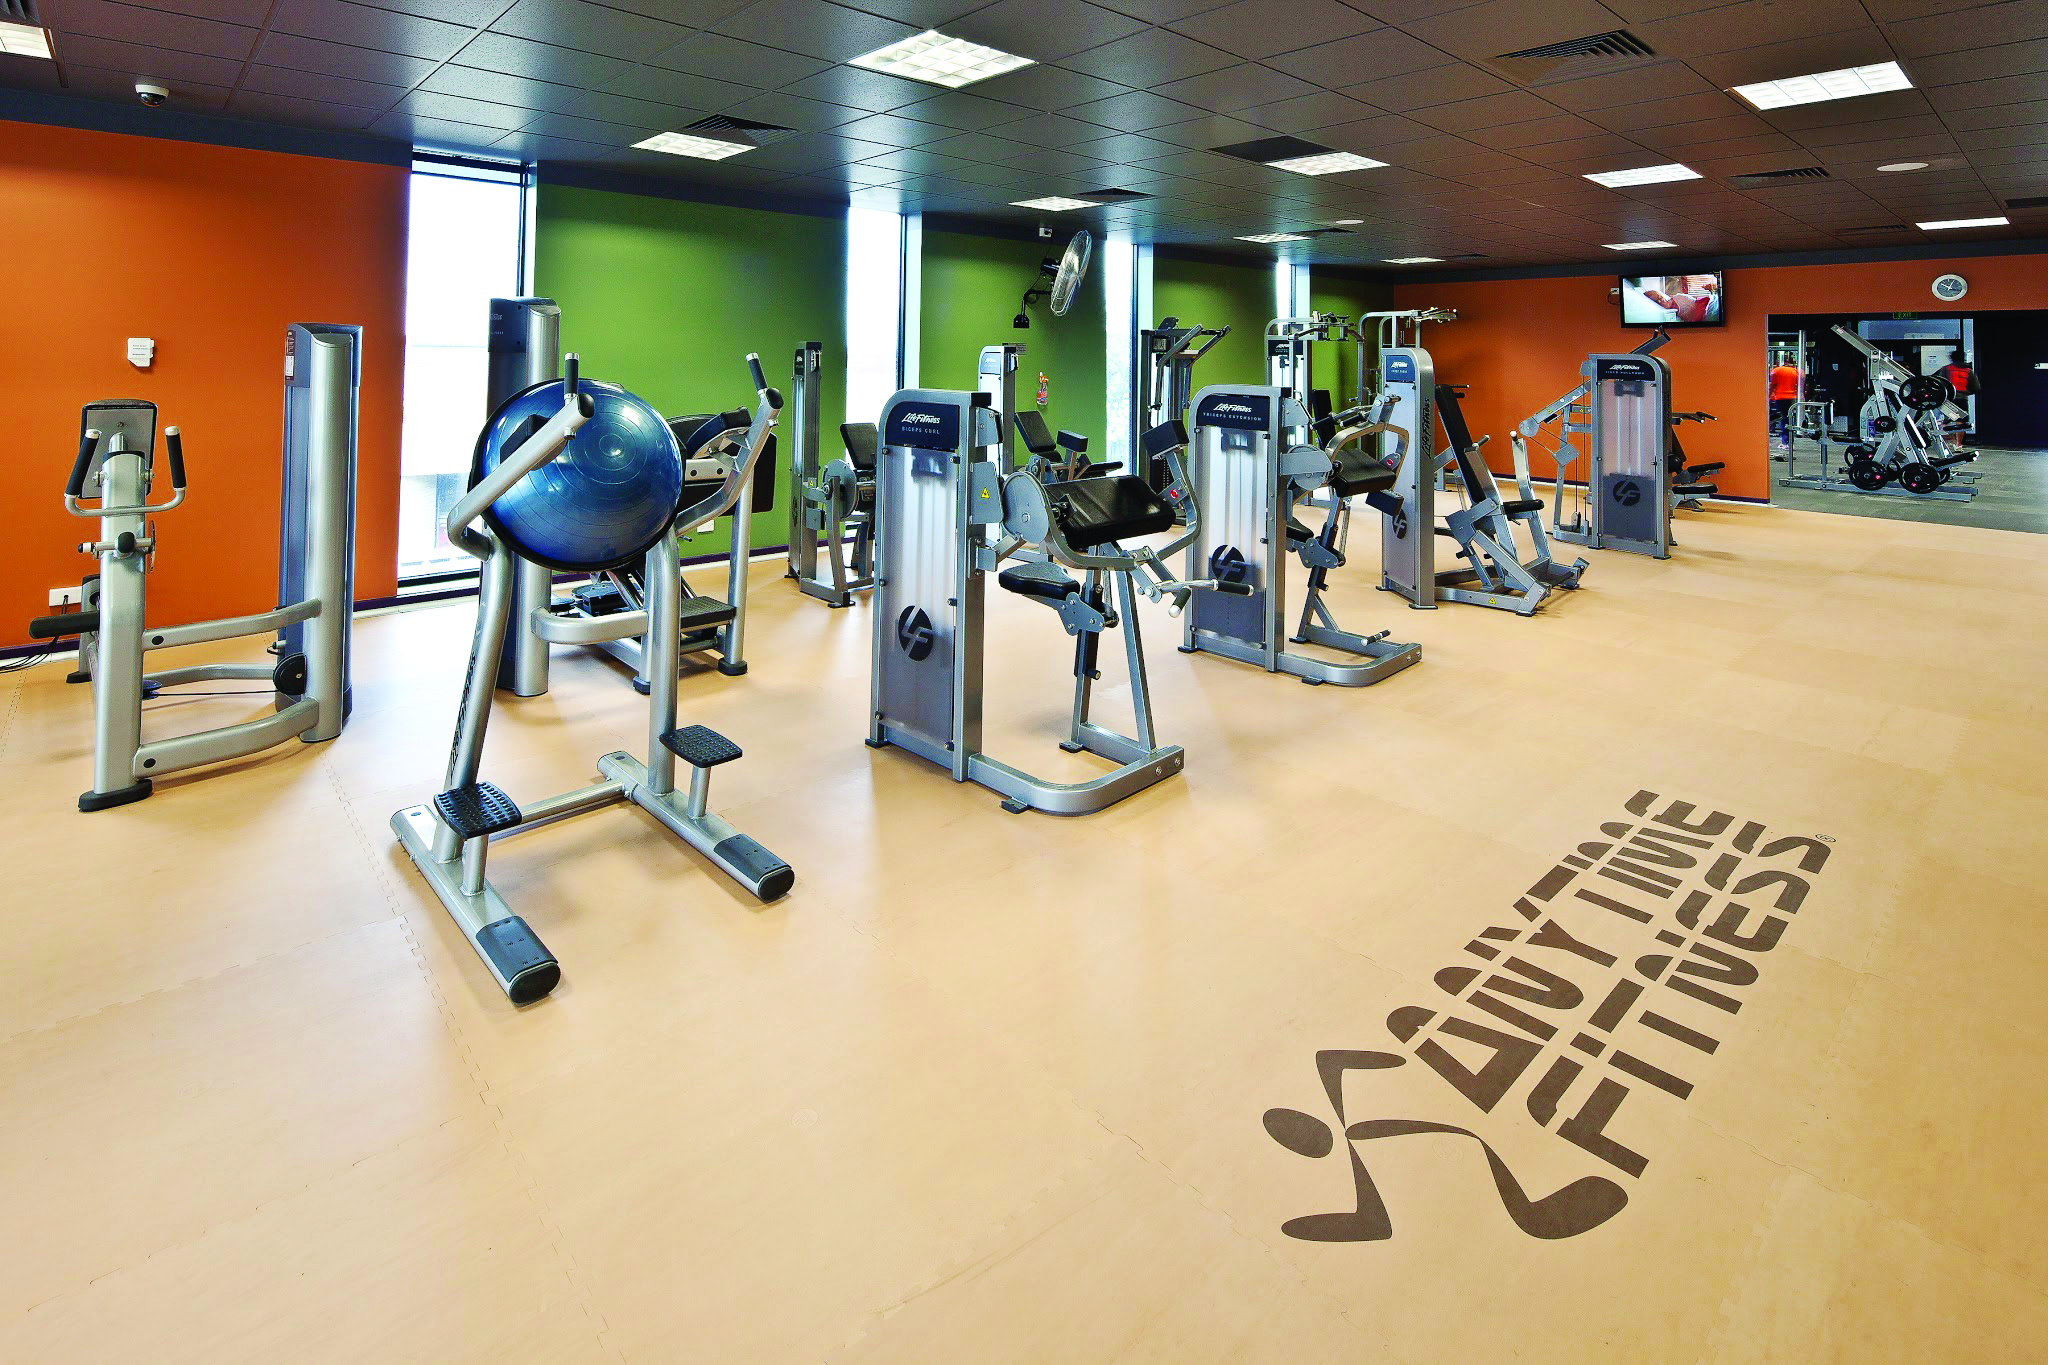 Anytime fitness greeley photos